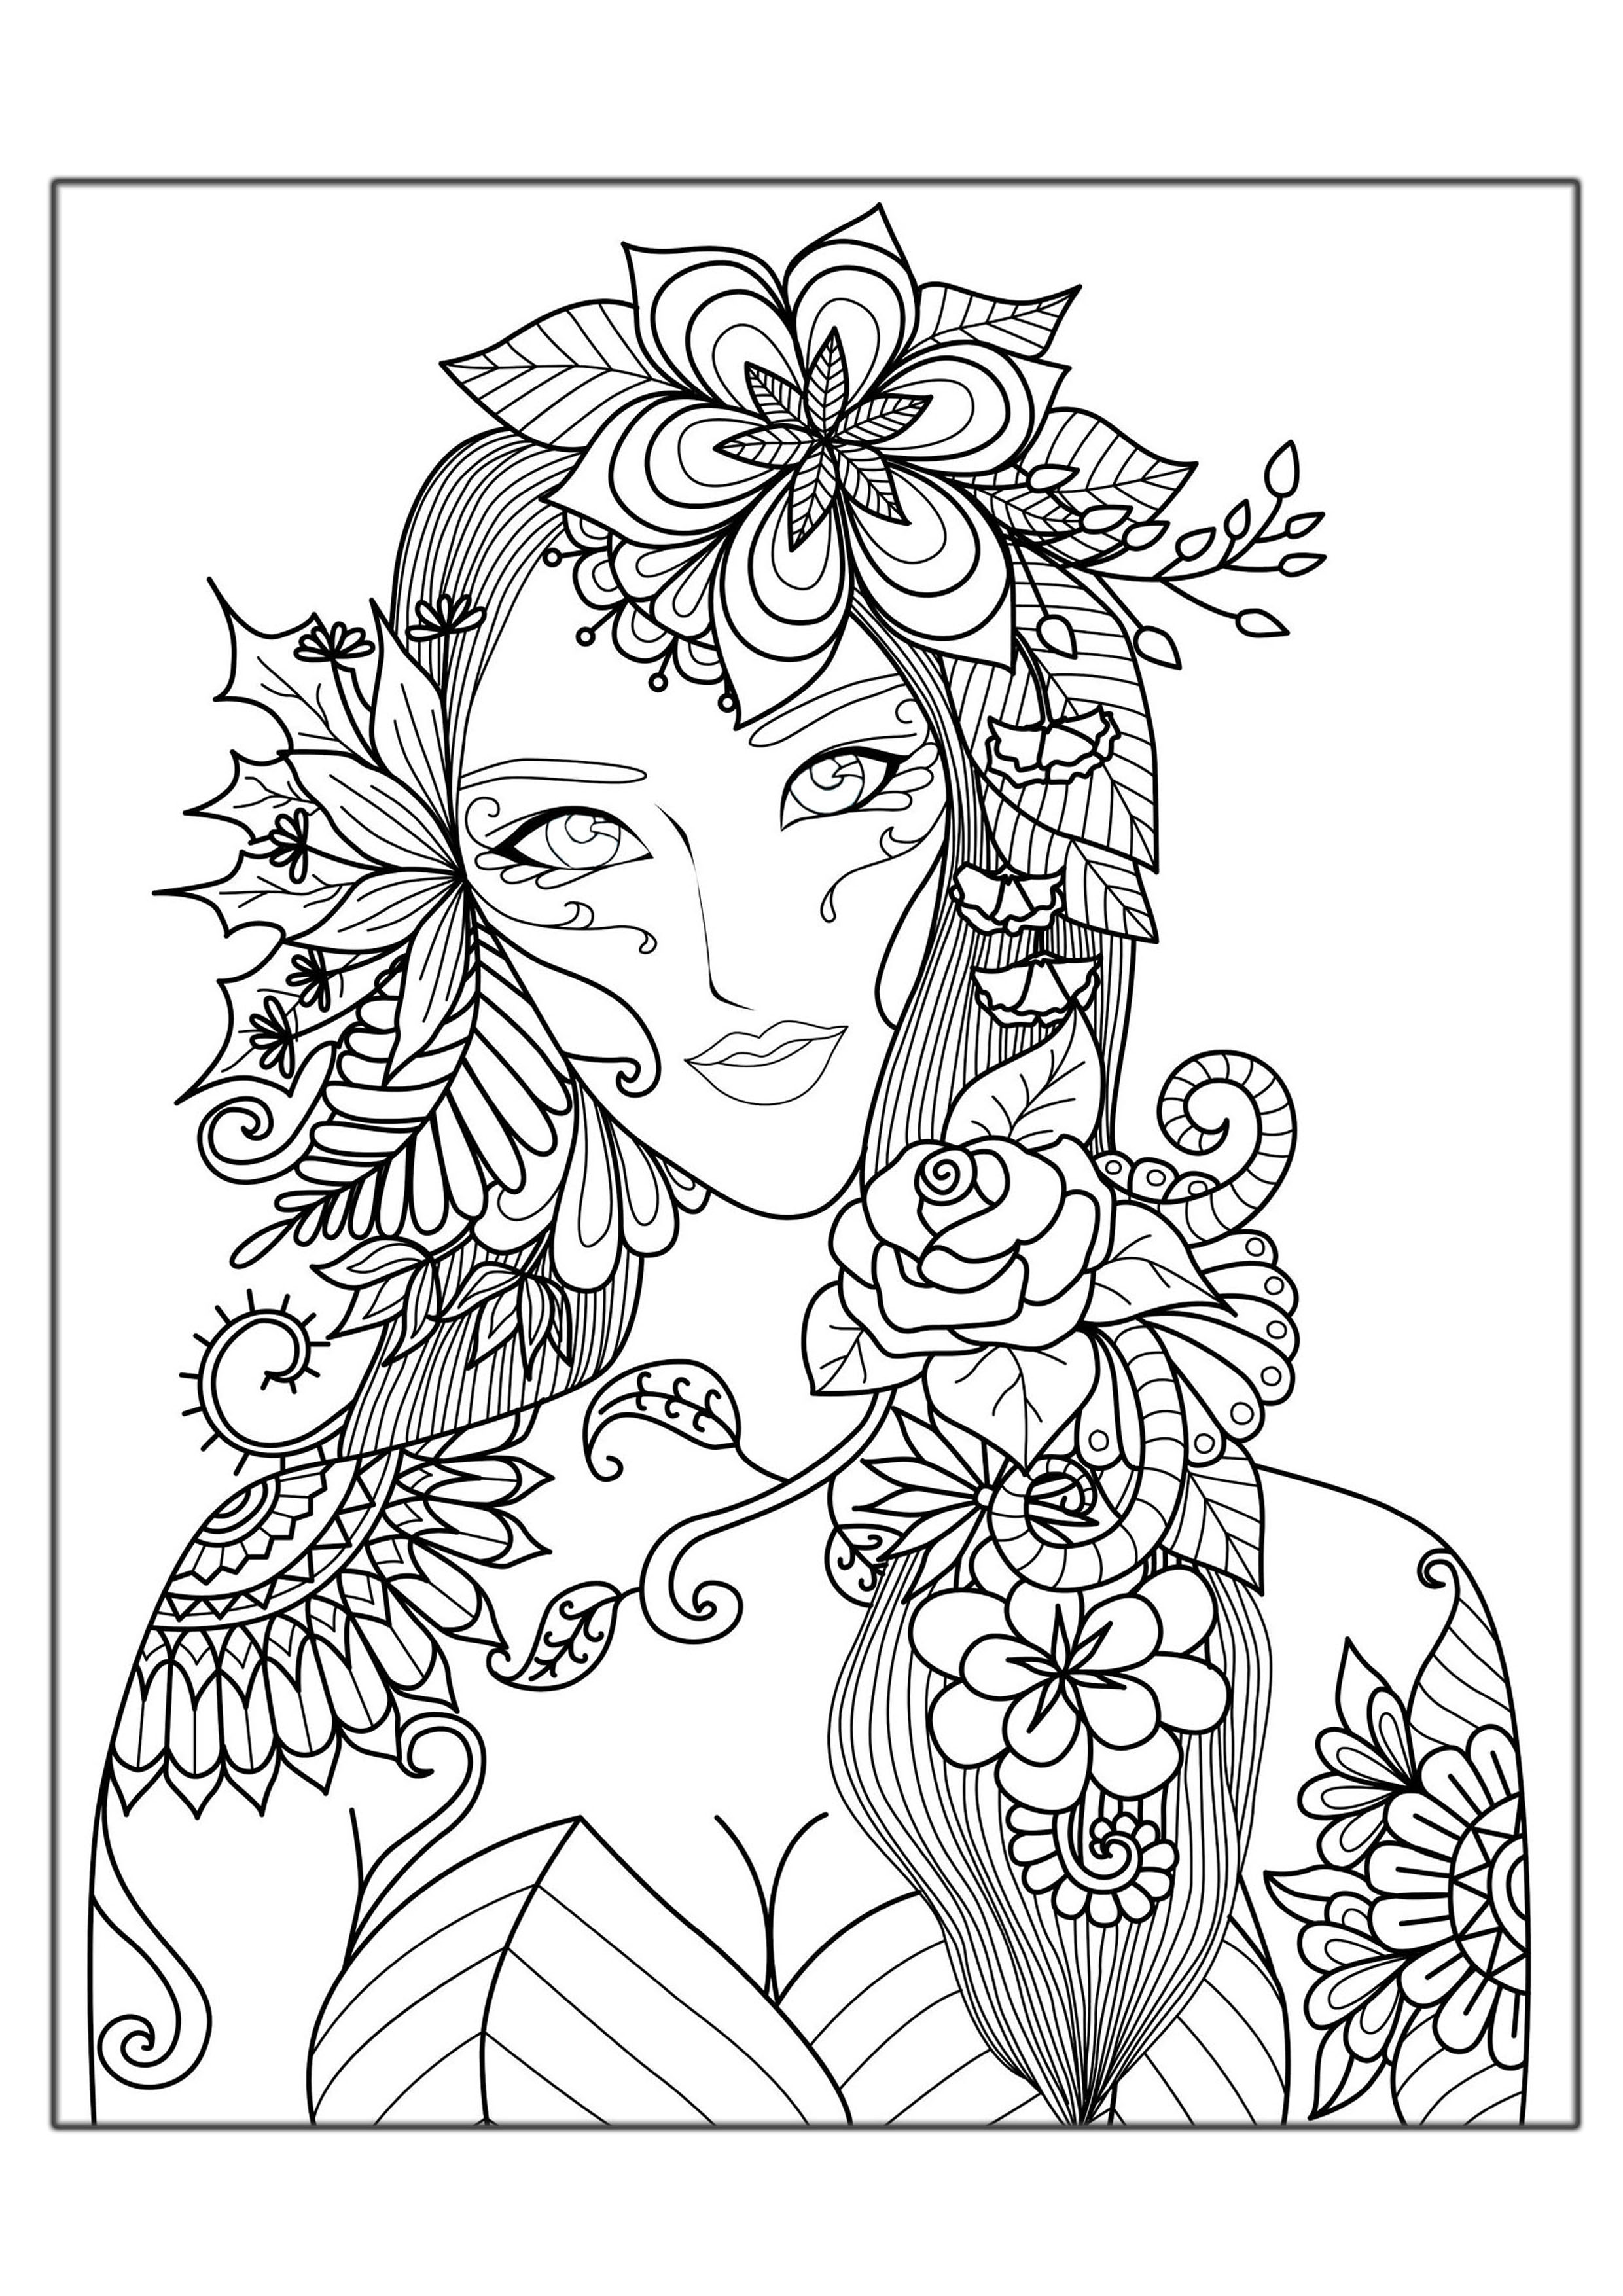 Hard Coloring Pages   Coloring Pages For Kids And Adults